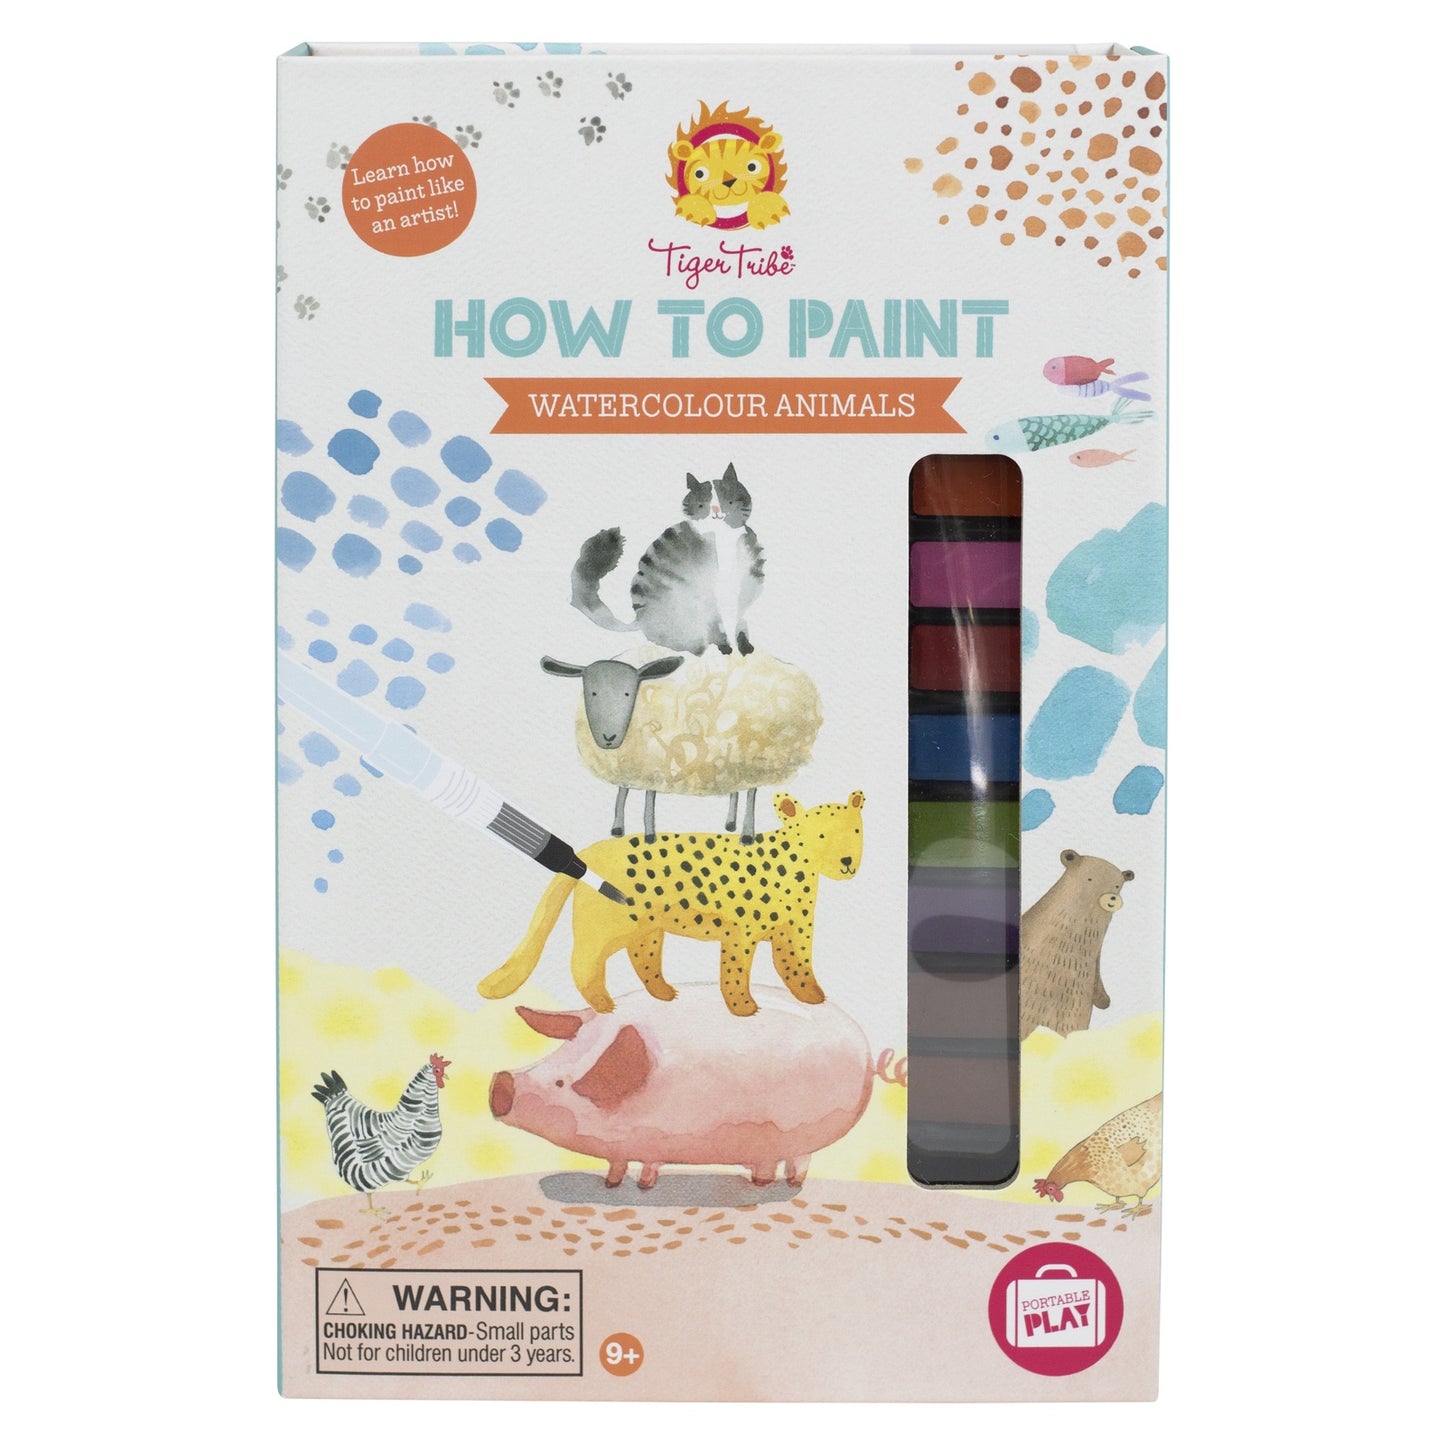 How To Paint Watercolour Animals